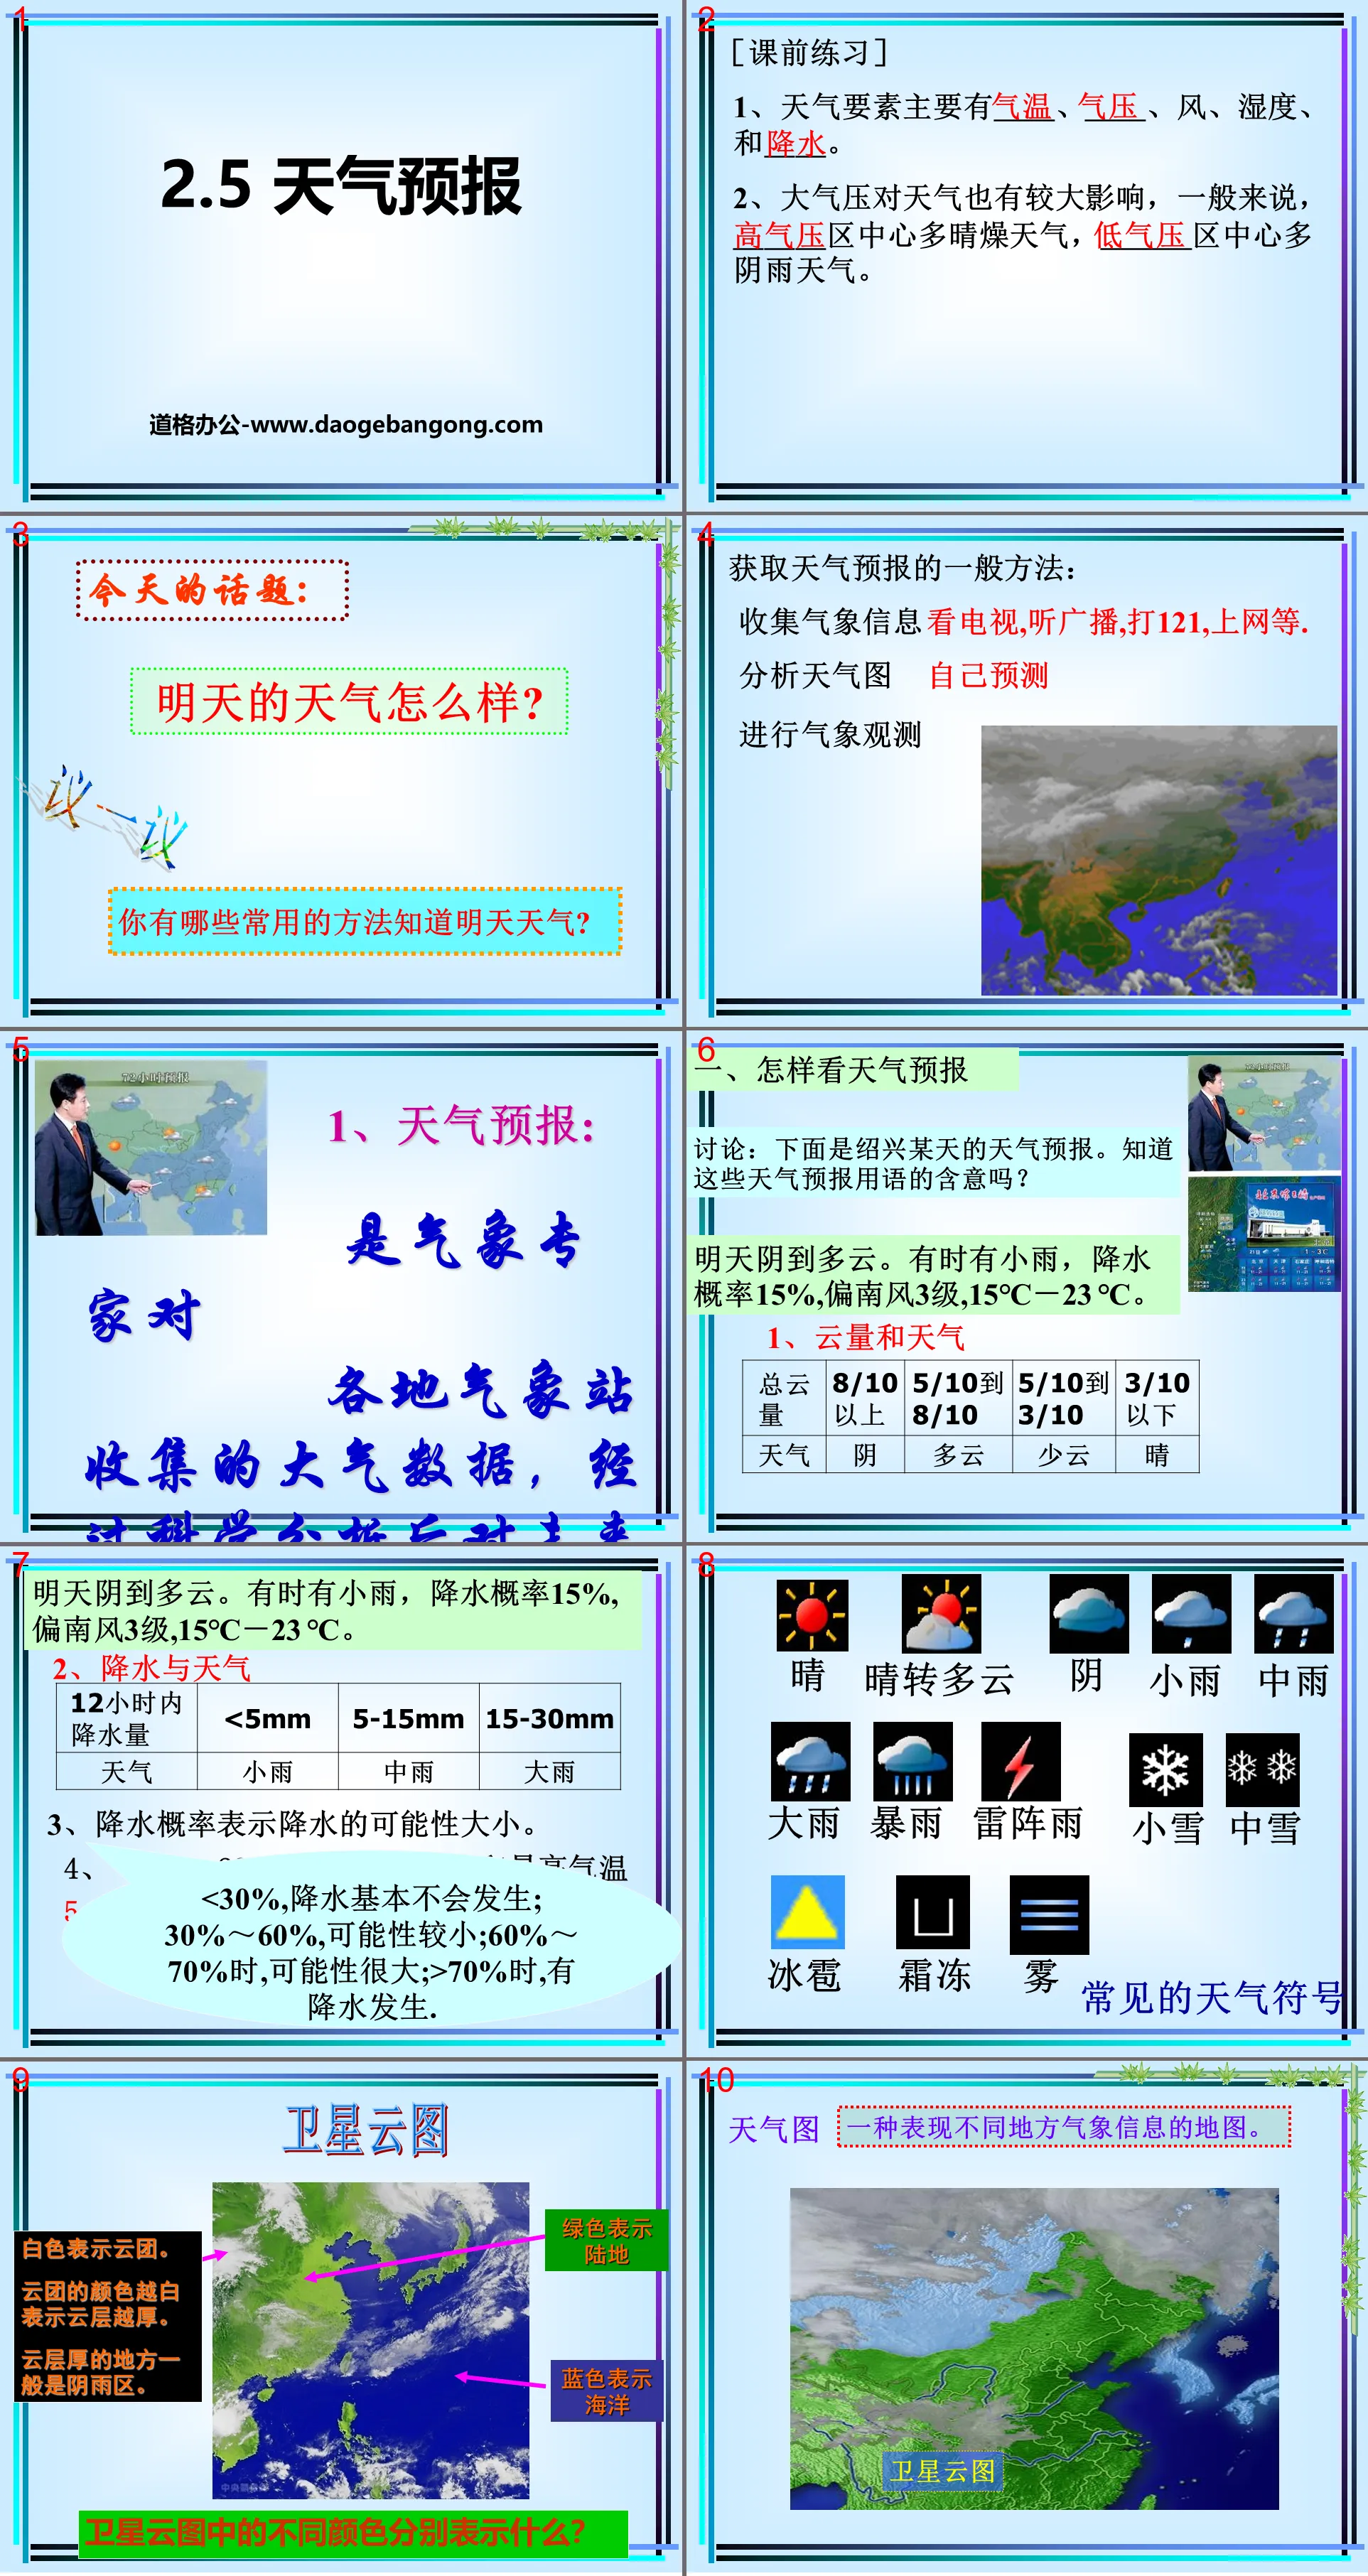 "Weather Forecast" PPT